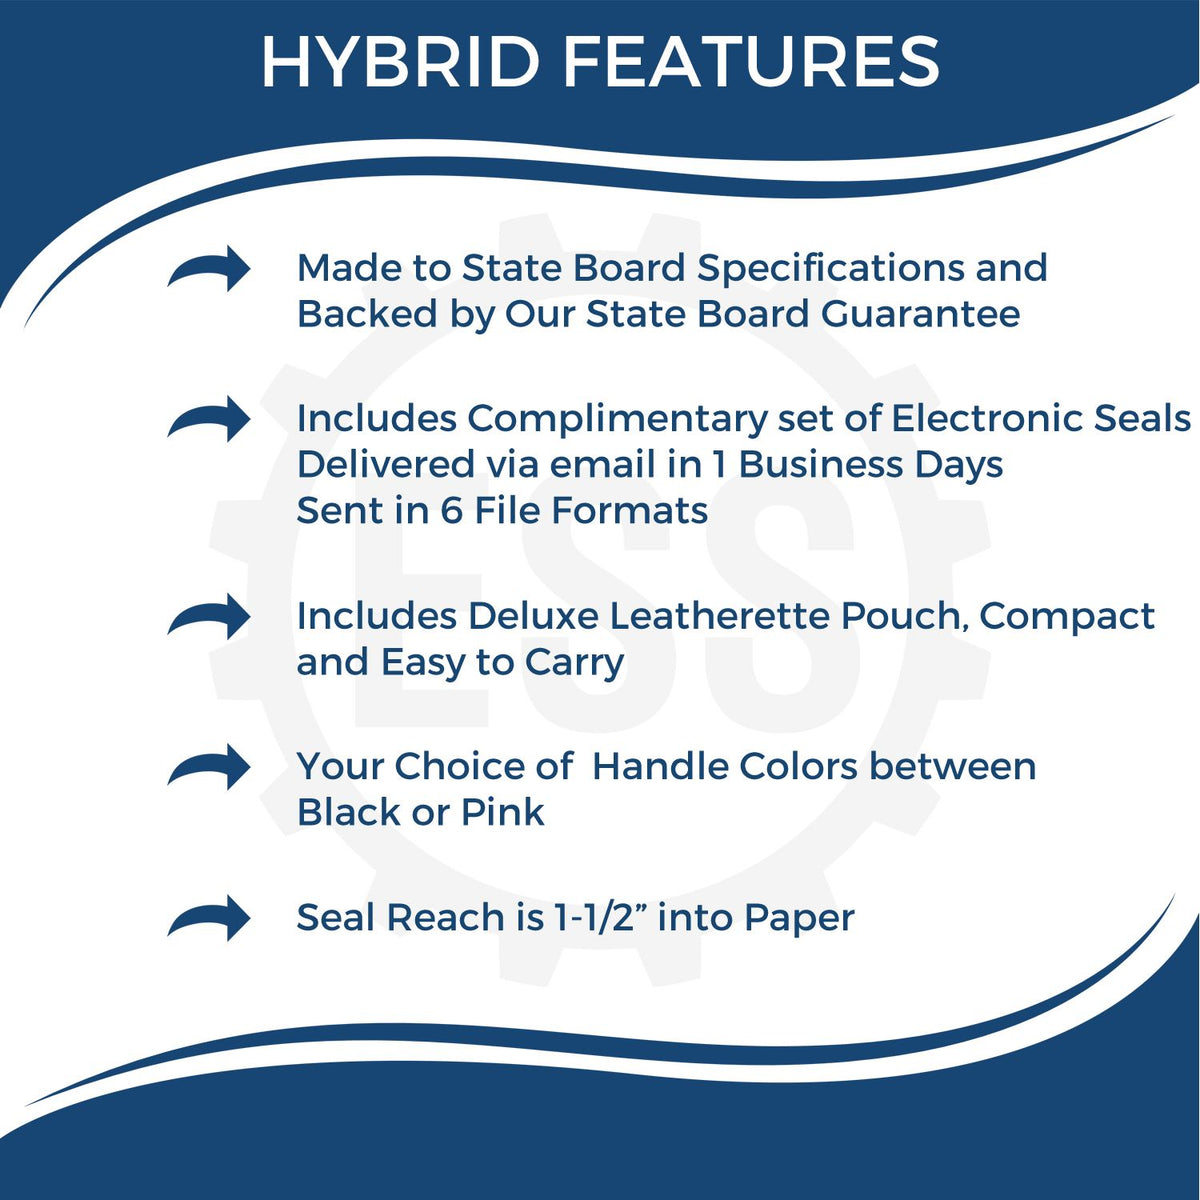 A picture of an infographic highlighting the selling points for the Hybrid Texas Architect Seal